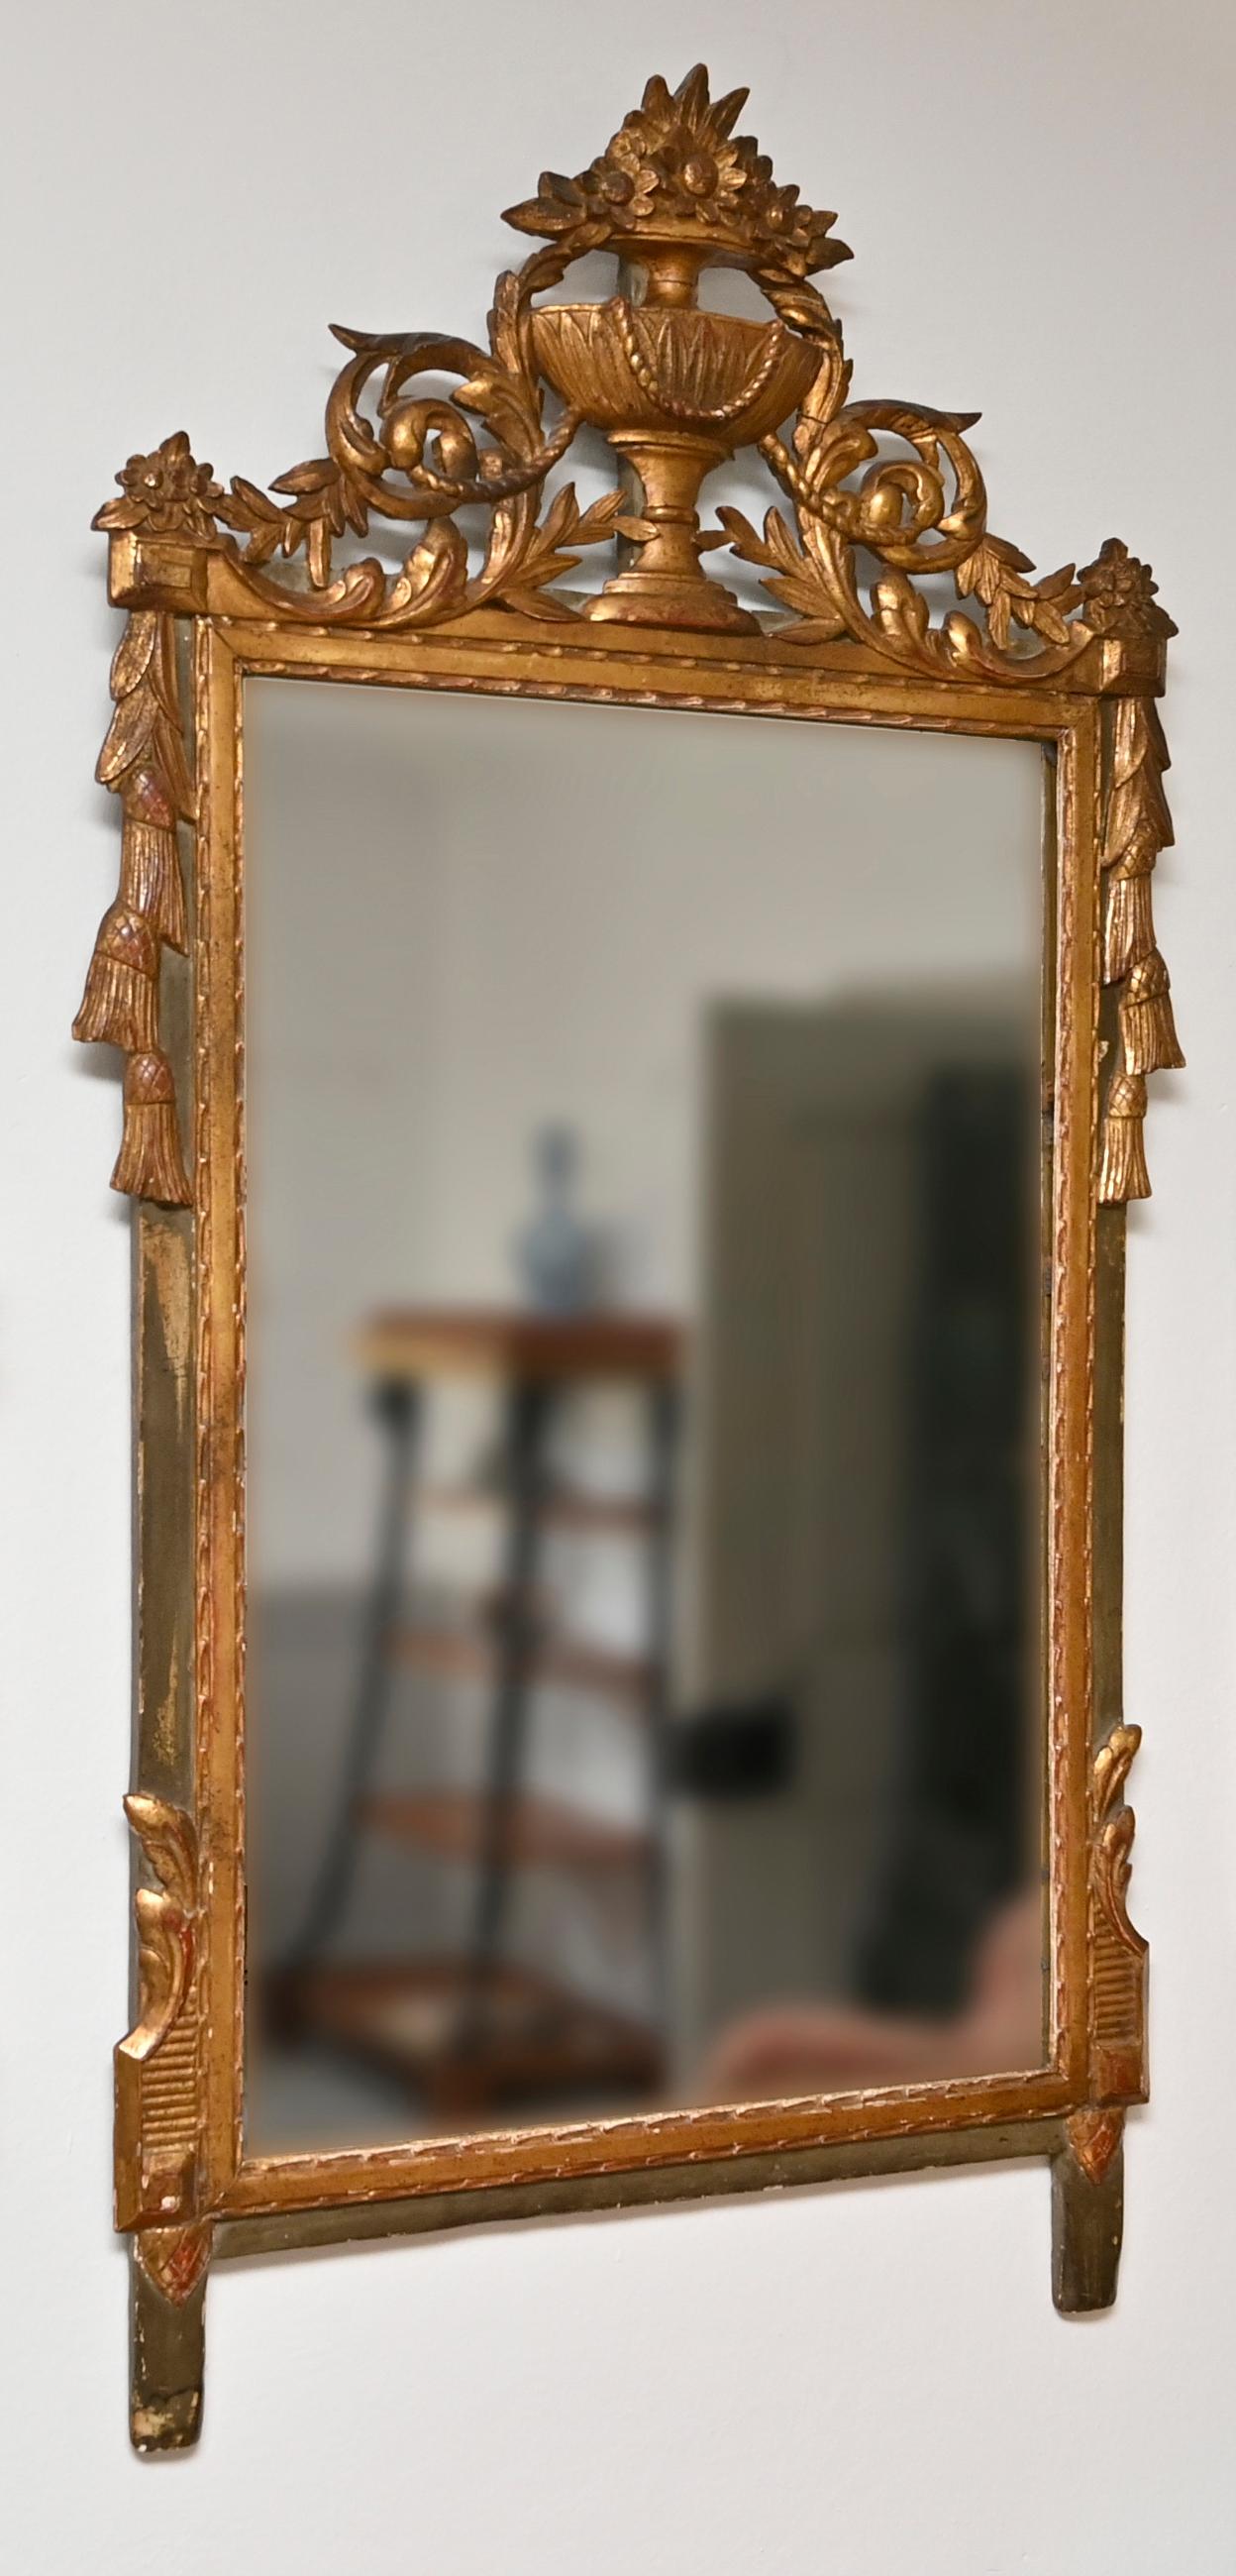 Hand-Carved 18th Century French Mirror Louis Seize Gilded Wood Carved Original Mirror Glass For Sale